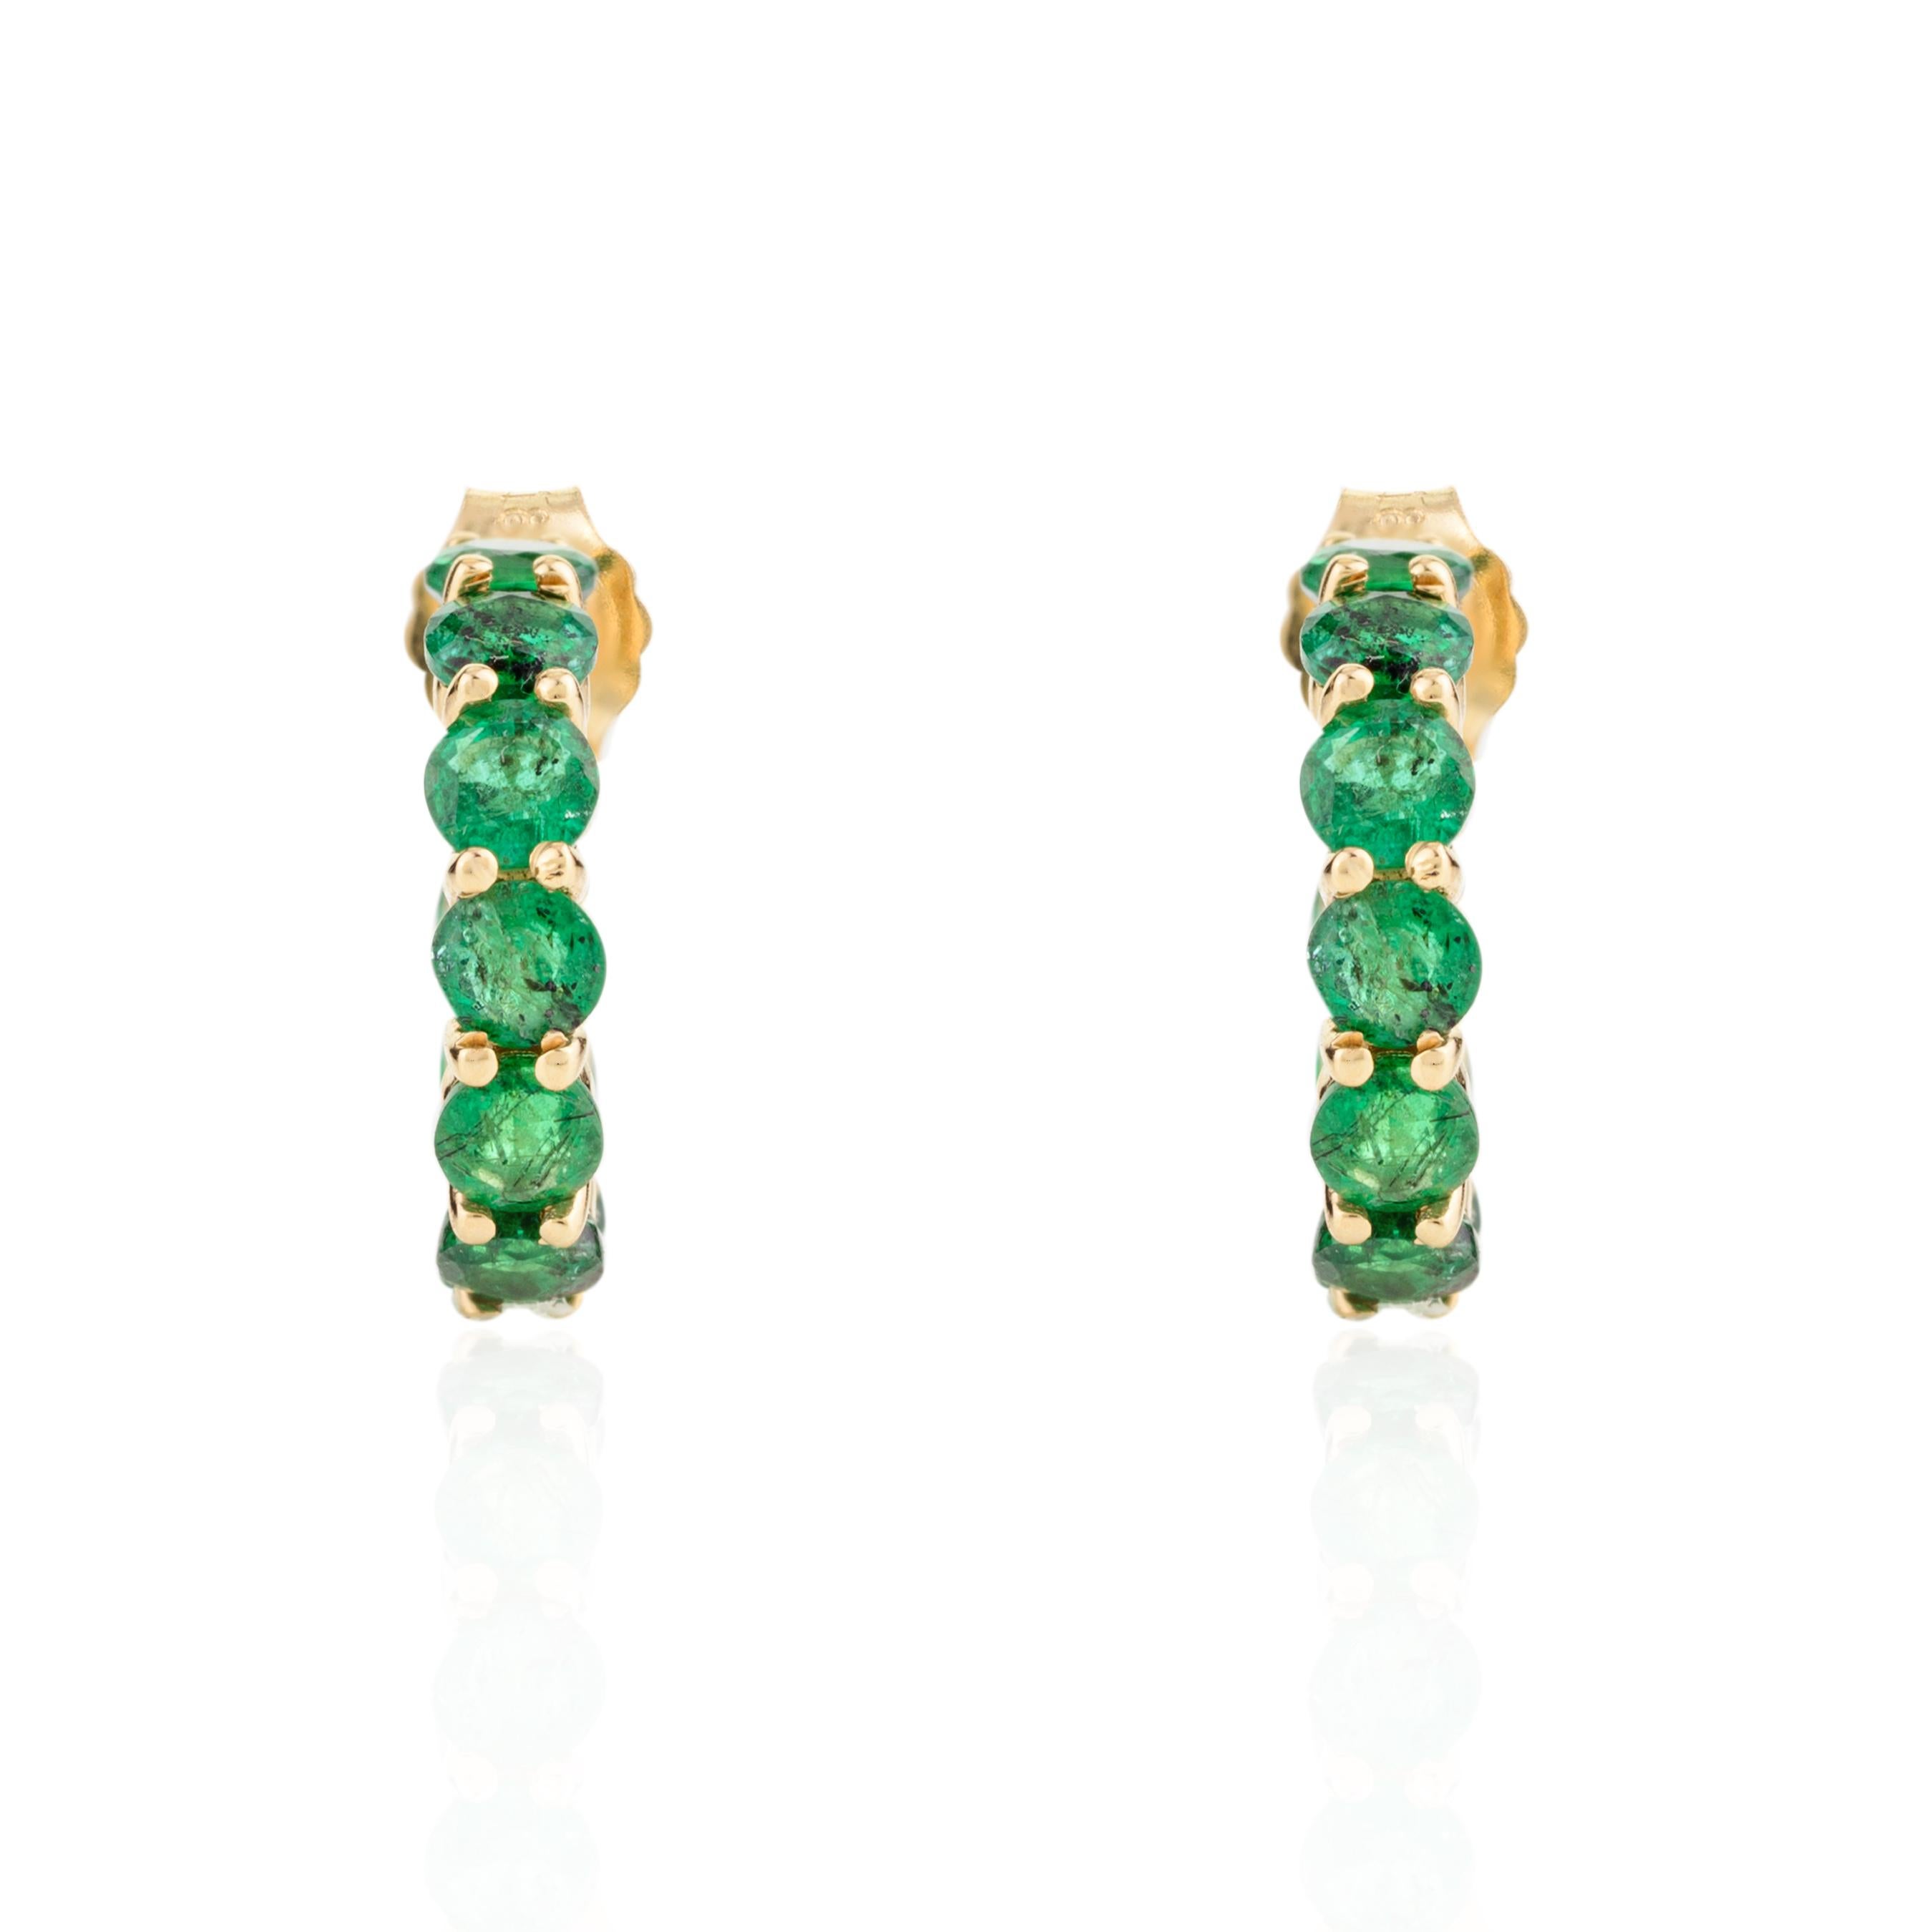 Natural Emerald Everyday Huggie Hoop Earrings in 18K Gold to make a statement with your look. You shall need stud earrings to make a statement with your look. These earrings create a sparkling, luxurious look featuring round cut emerald.
Emerald